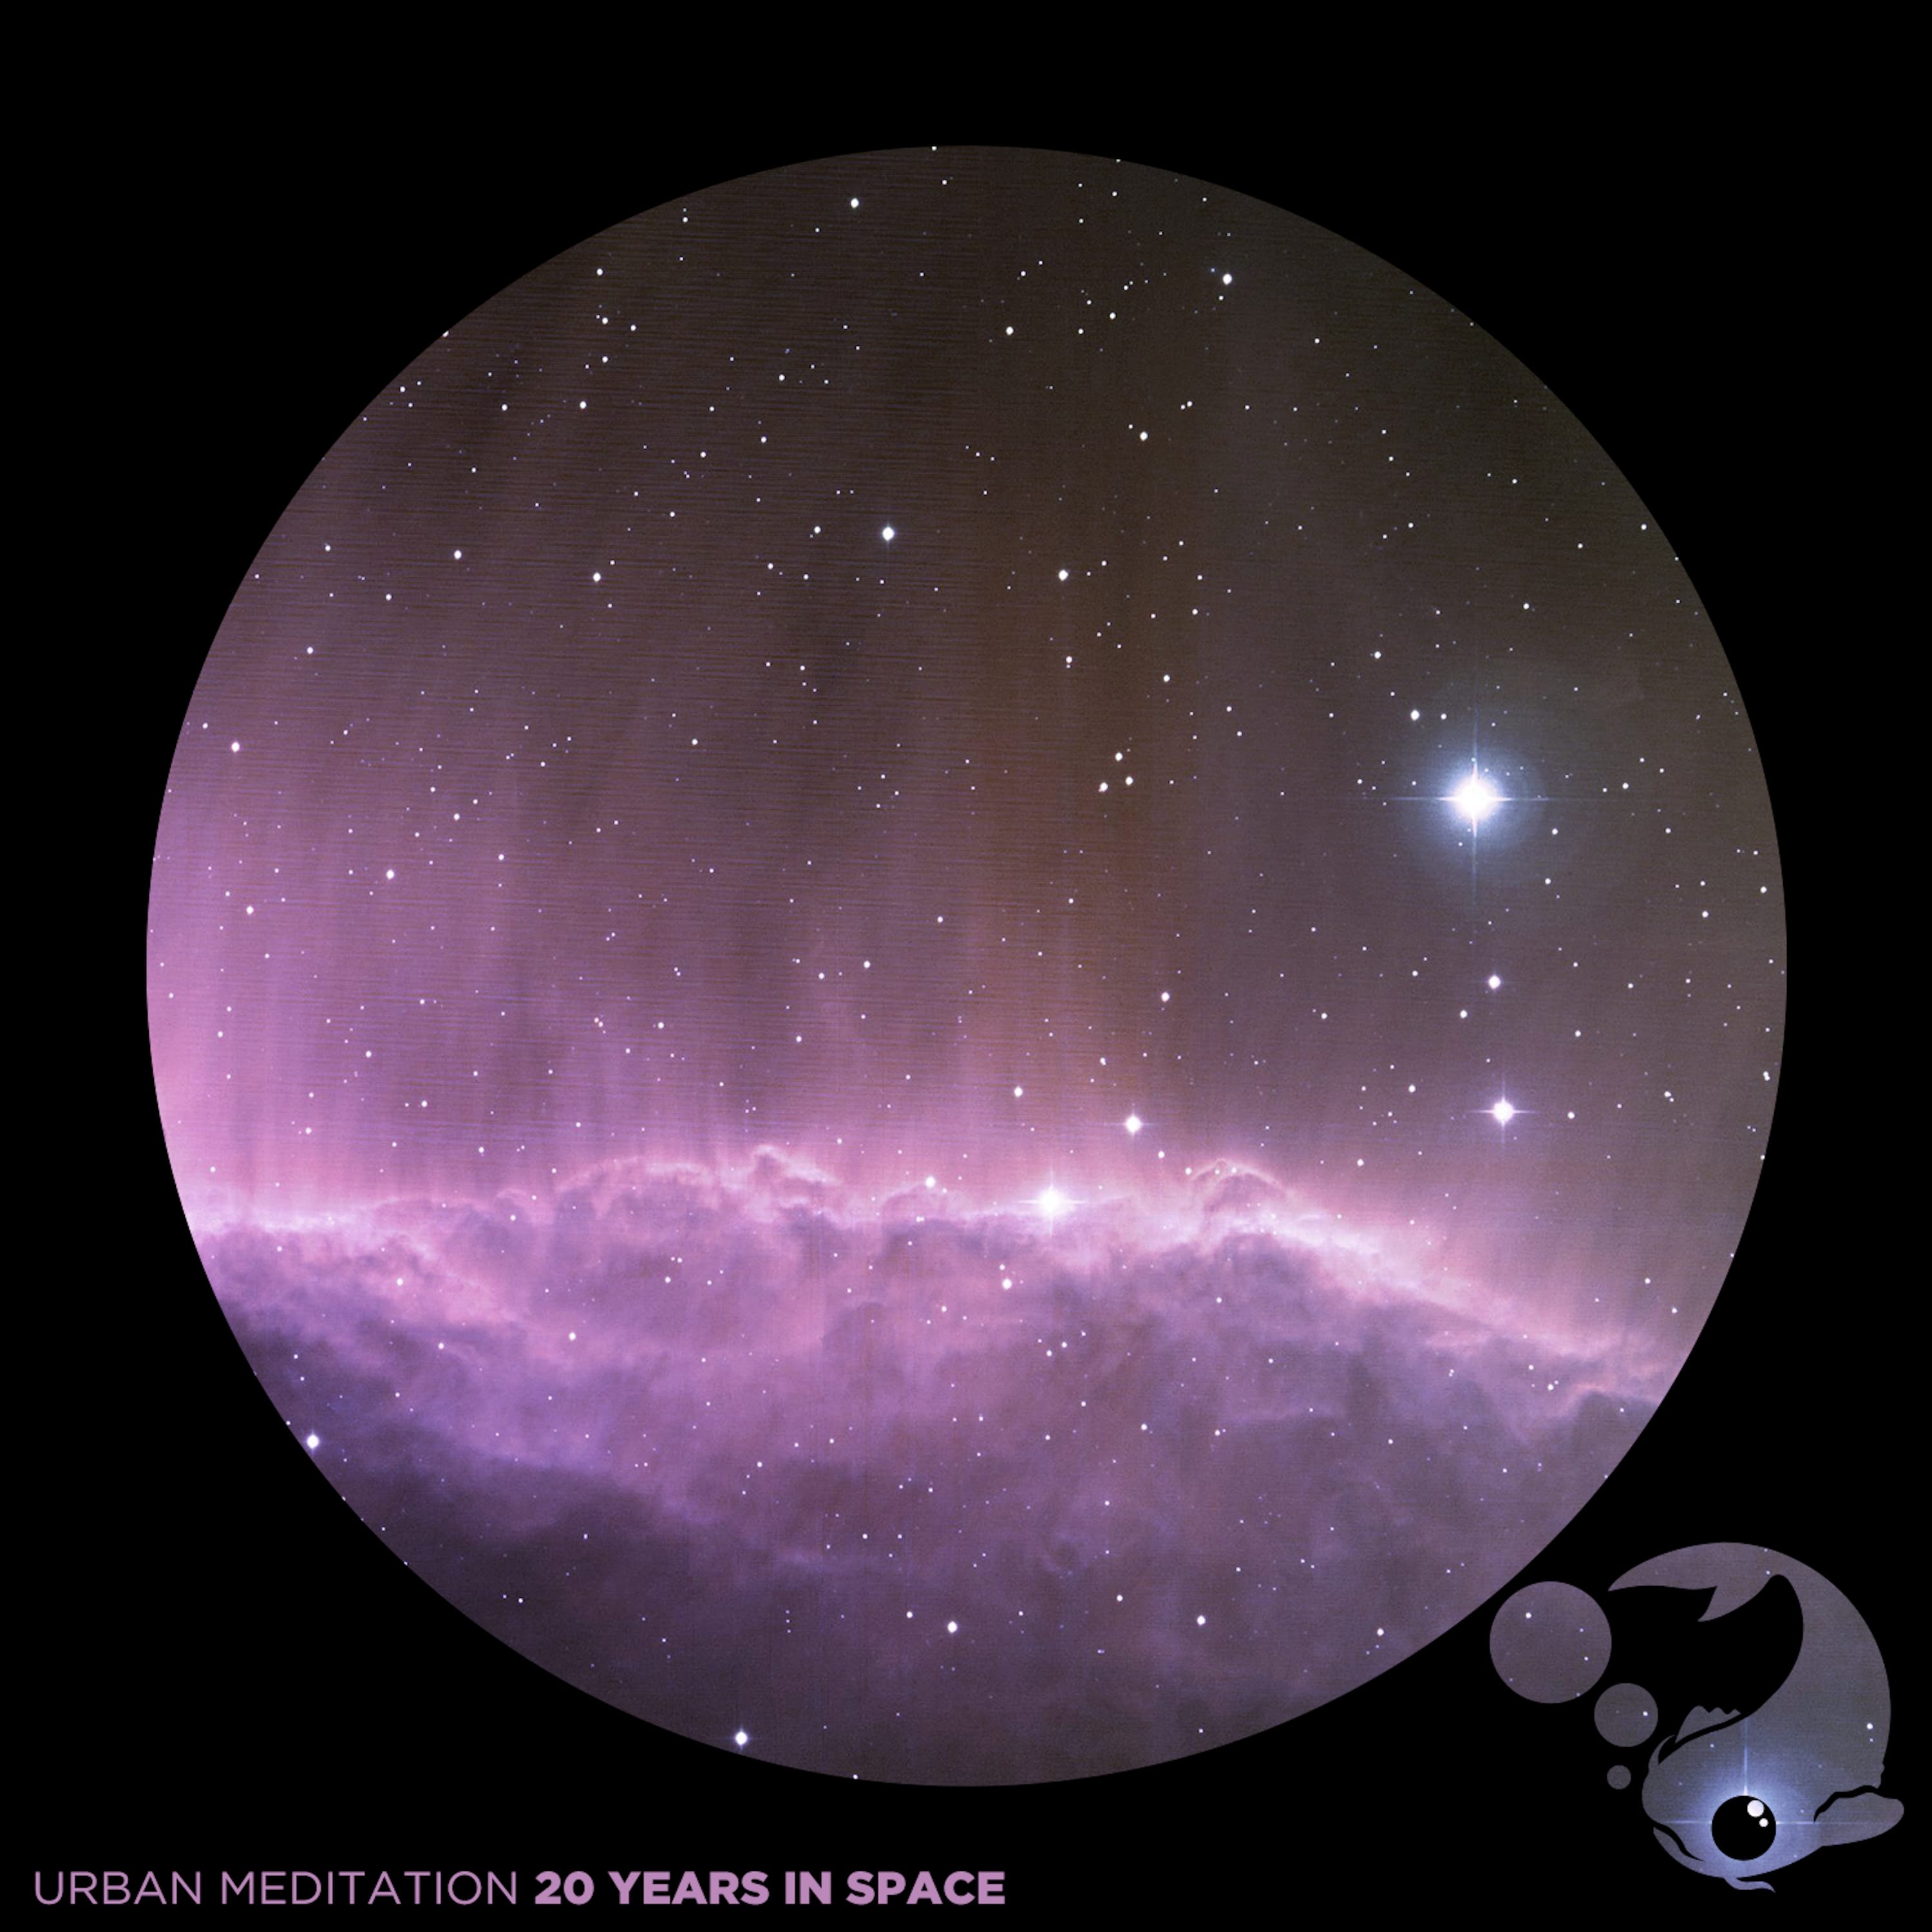 Urban Meditation - 20 Years in Space